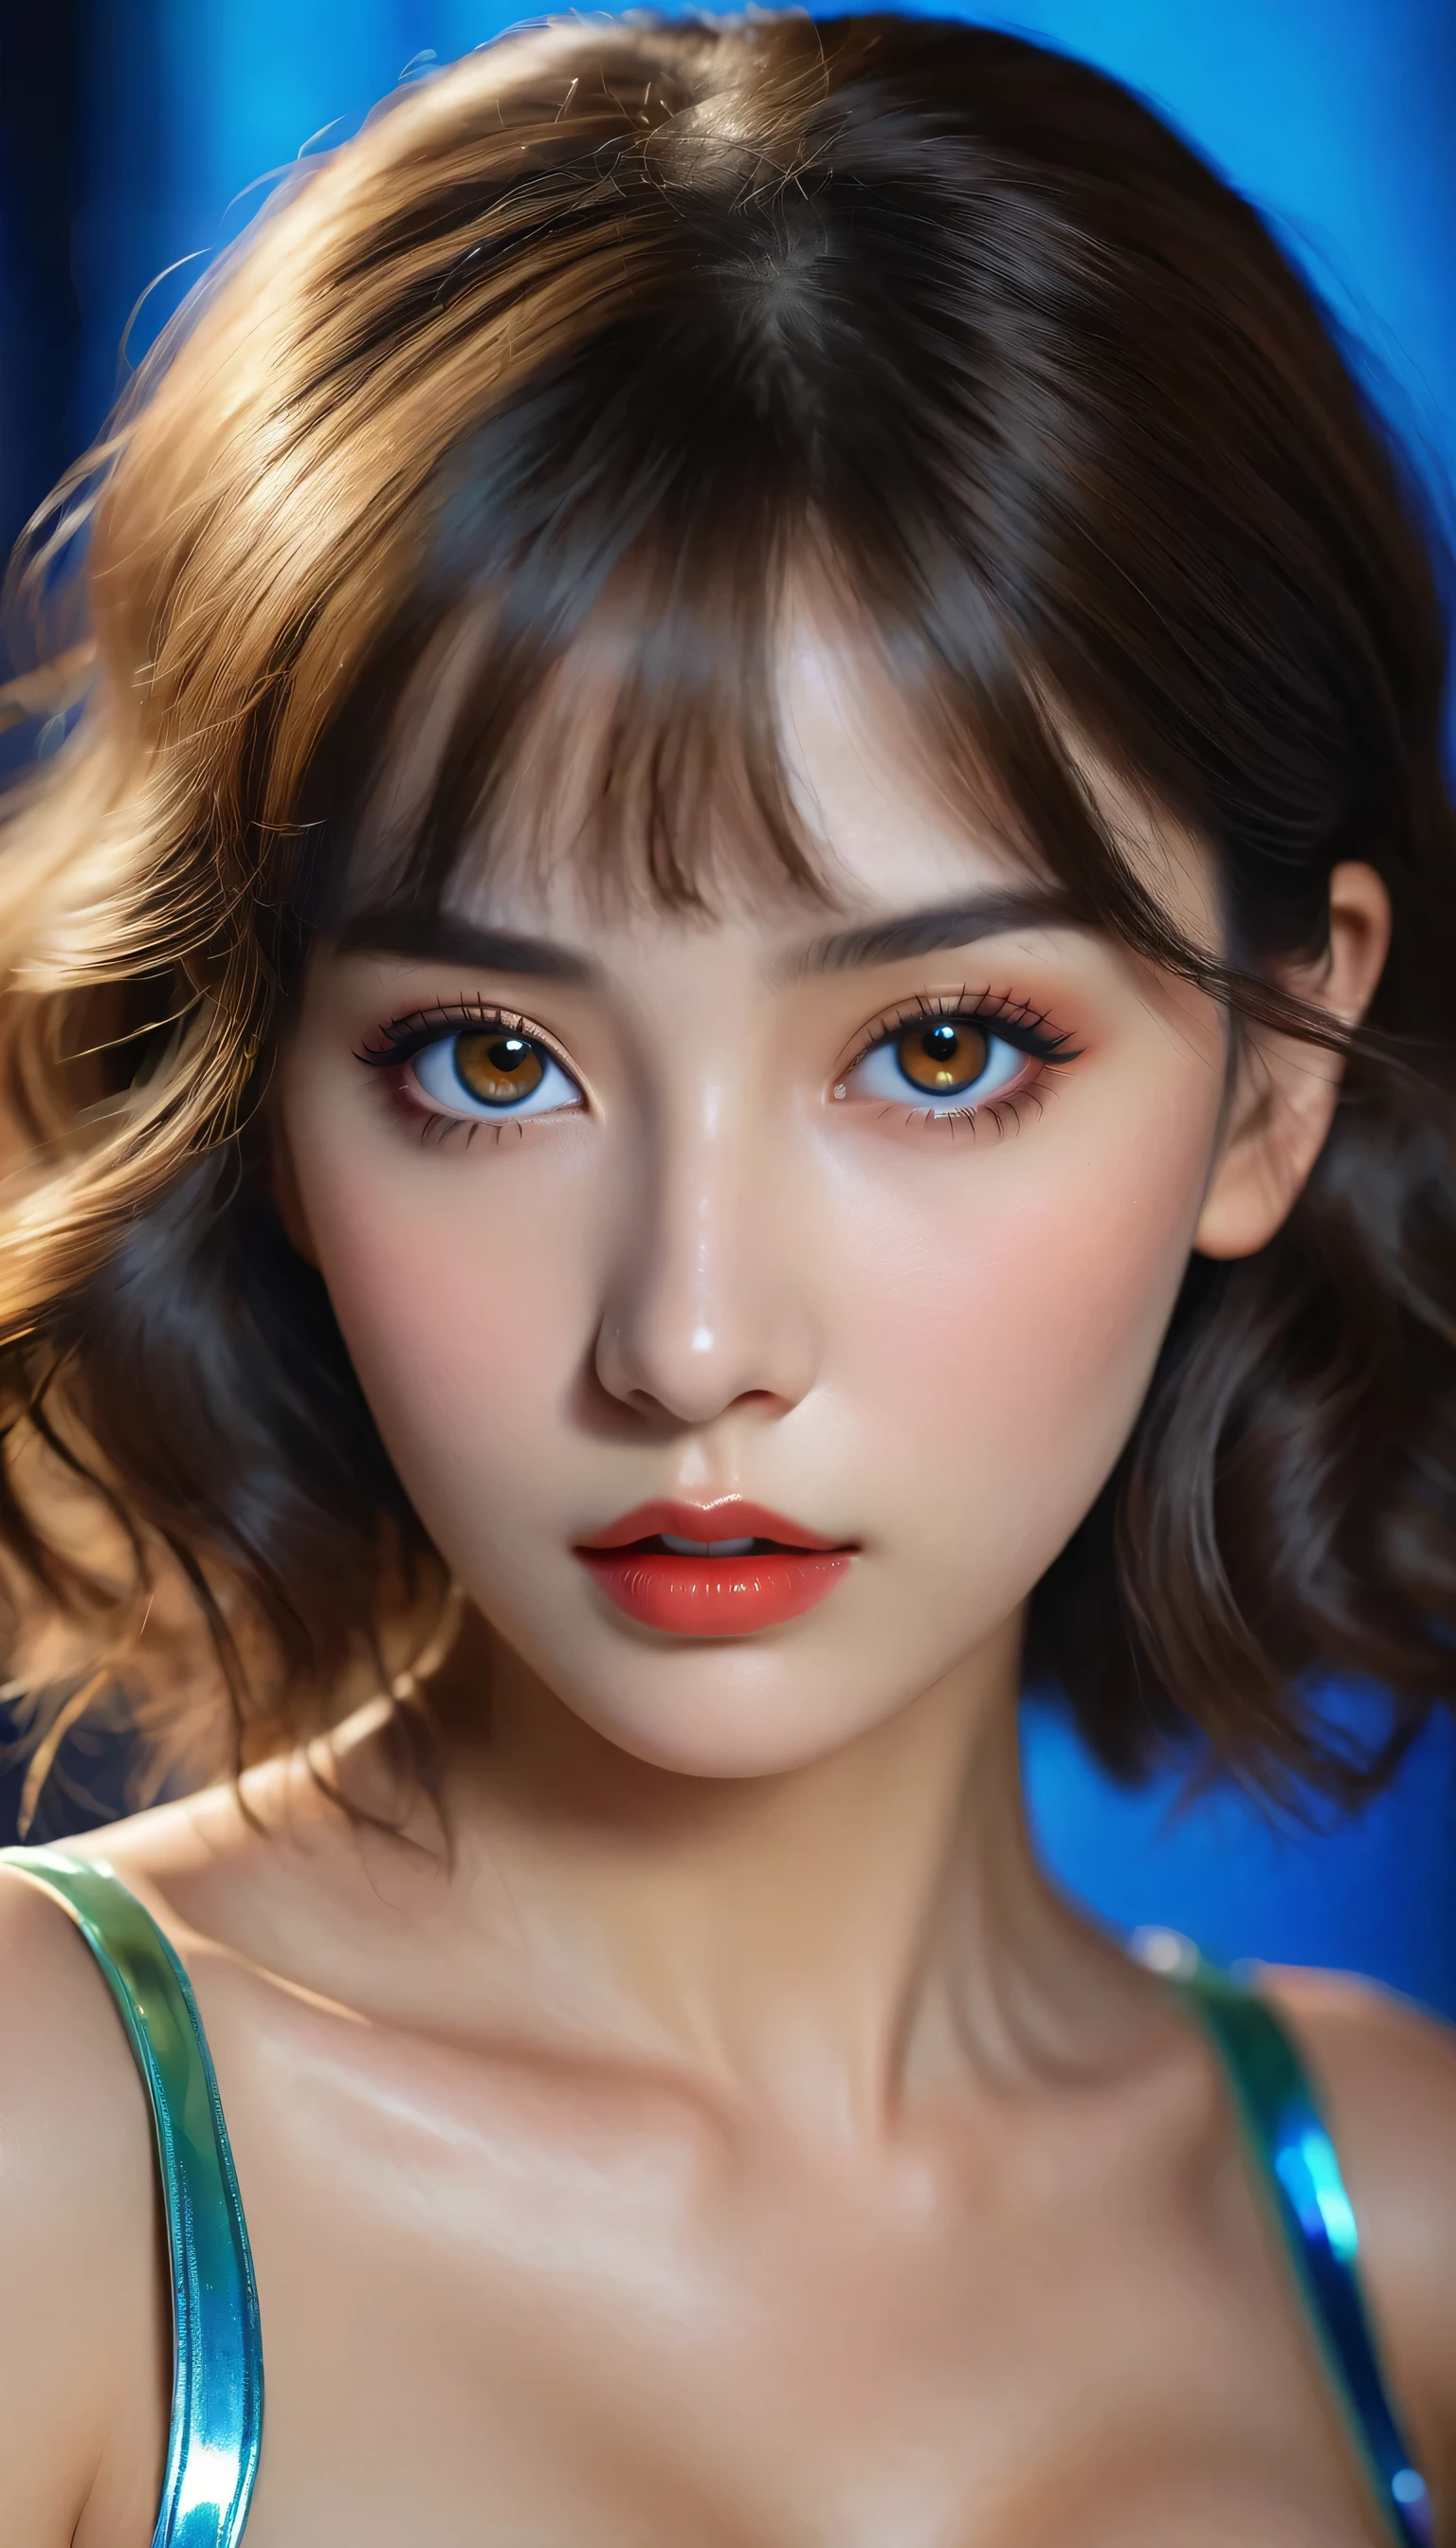 photorealistic Realism 8K, 16K Quality, (ultra absurd quality, extremely detailed detail, hyper resolution, clear sharp focus, not blurry, (perfect round, Realistic brown eyes)), ((perfect dark_eyeshadows)), (super Detailed, beautiful little nose), (perfect composition), Depth of field, cinematic light, Lens flare, (extremely beautiful face, beautiful lips), pink_makeup:1.22, long_blue_eyeliner:1.28, red_lipstick:1.35,(perfect dark_eyeshadows:1.45), (super detailed professional makeup on eyes:1.3), (Detailed nose:1.2), Intricate detail face, best high quality real texture skin, (A woman with velvety skin), ((best high quality real texture hair)), (short blonde hair, (wavy, combed up, behind the ear), extremely detailed)), photo of the most beautiful artwork in the world, professional majestic (photography by Steve McCurry), 8k uhd, dslr, soft lighting, high quality, Fujifilm XT3 sharp focus, f 5.6, dramatic, (Anatomically correct perfect proportions), ((perfect hands:1.2)), ((perfect female body:1.4)), cute girl, ((firm and full breasts)), ((super beautiful cute sharp-face)), (light pale complexion), transparent color pvc ((full-body shiny latex, full colors Brightly outfit, holograph tight latex:1.24)), (((upper body to the knee: 1.4))), 